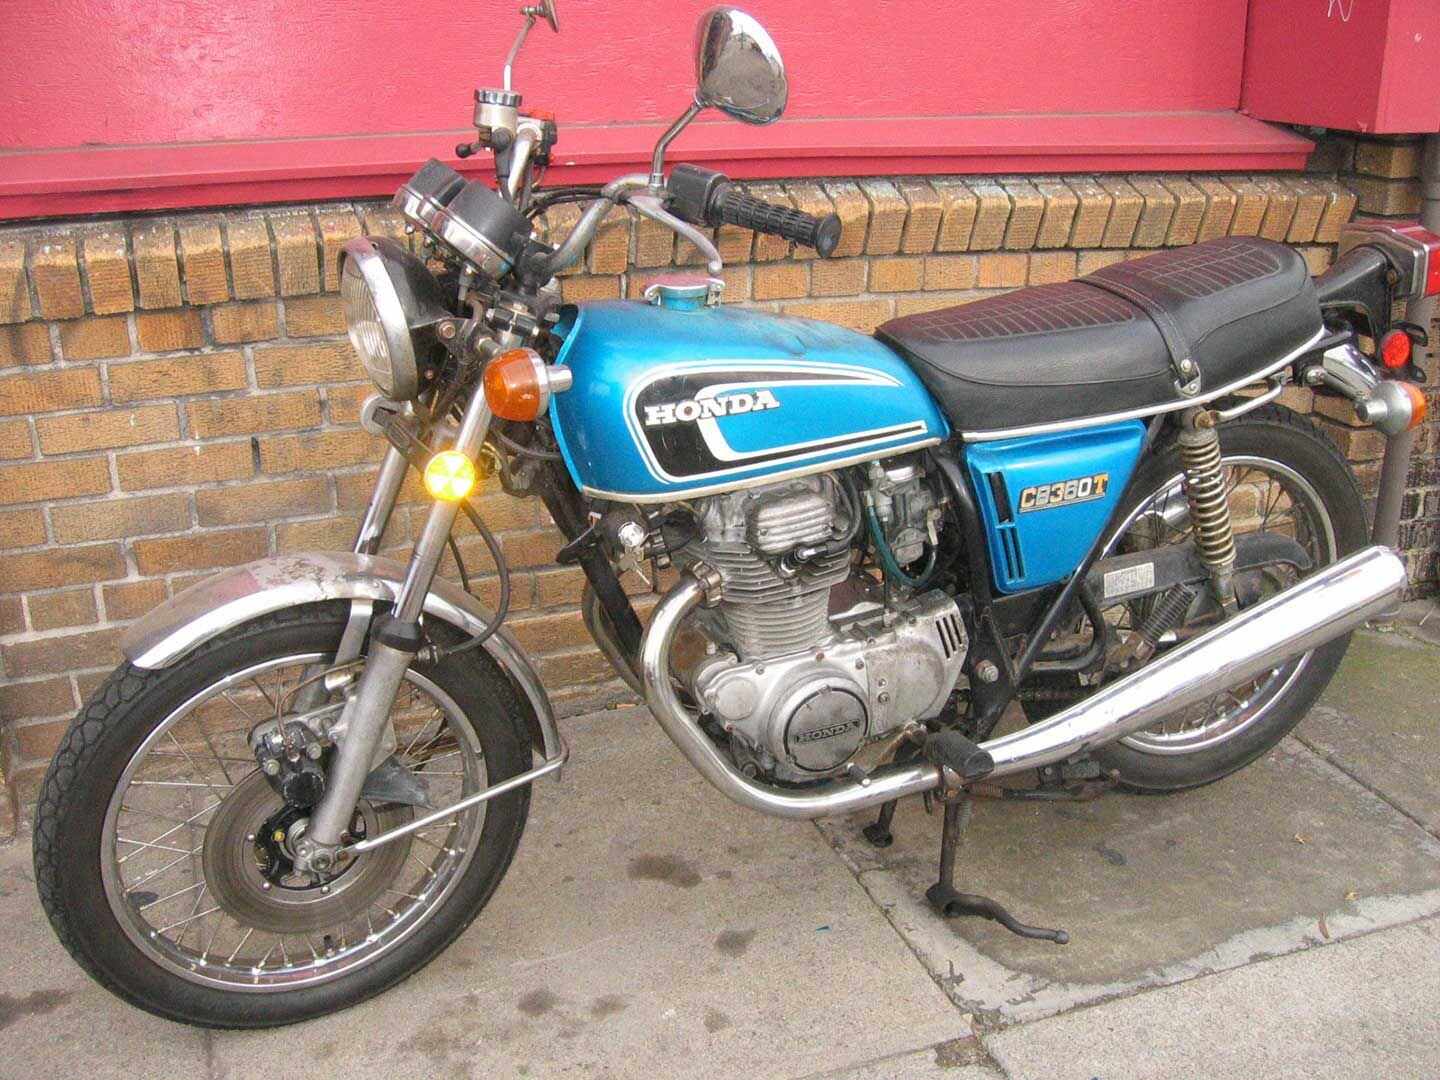 The Honda CB360T: Underpowered, unreliable, and undesirable.